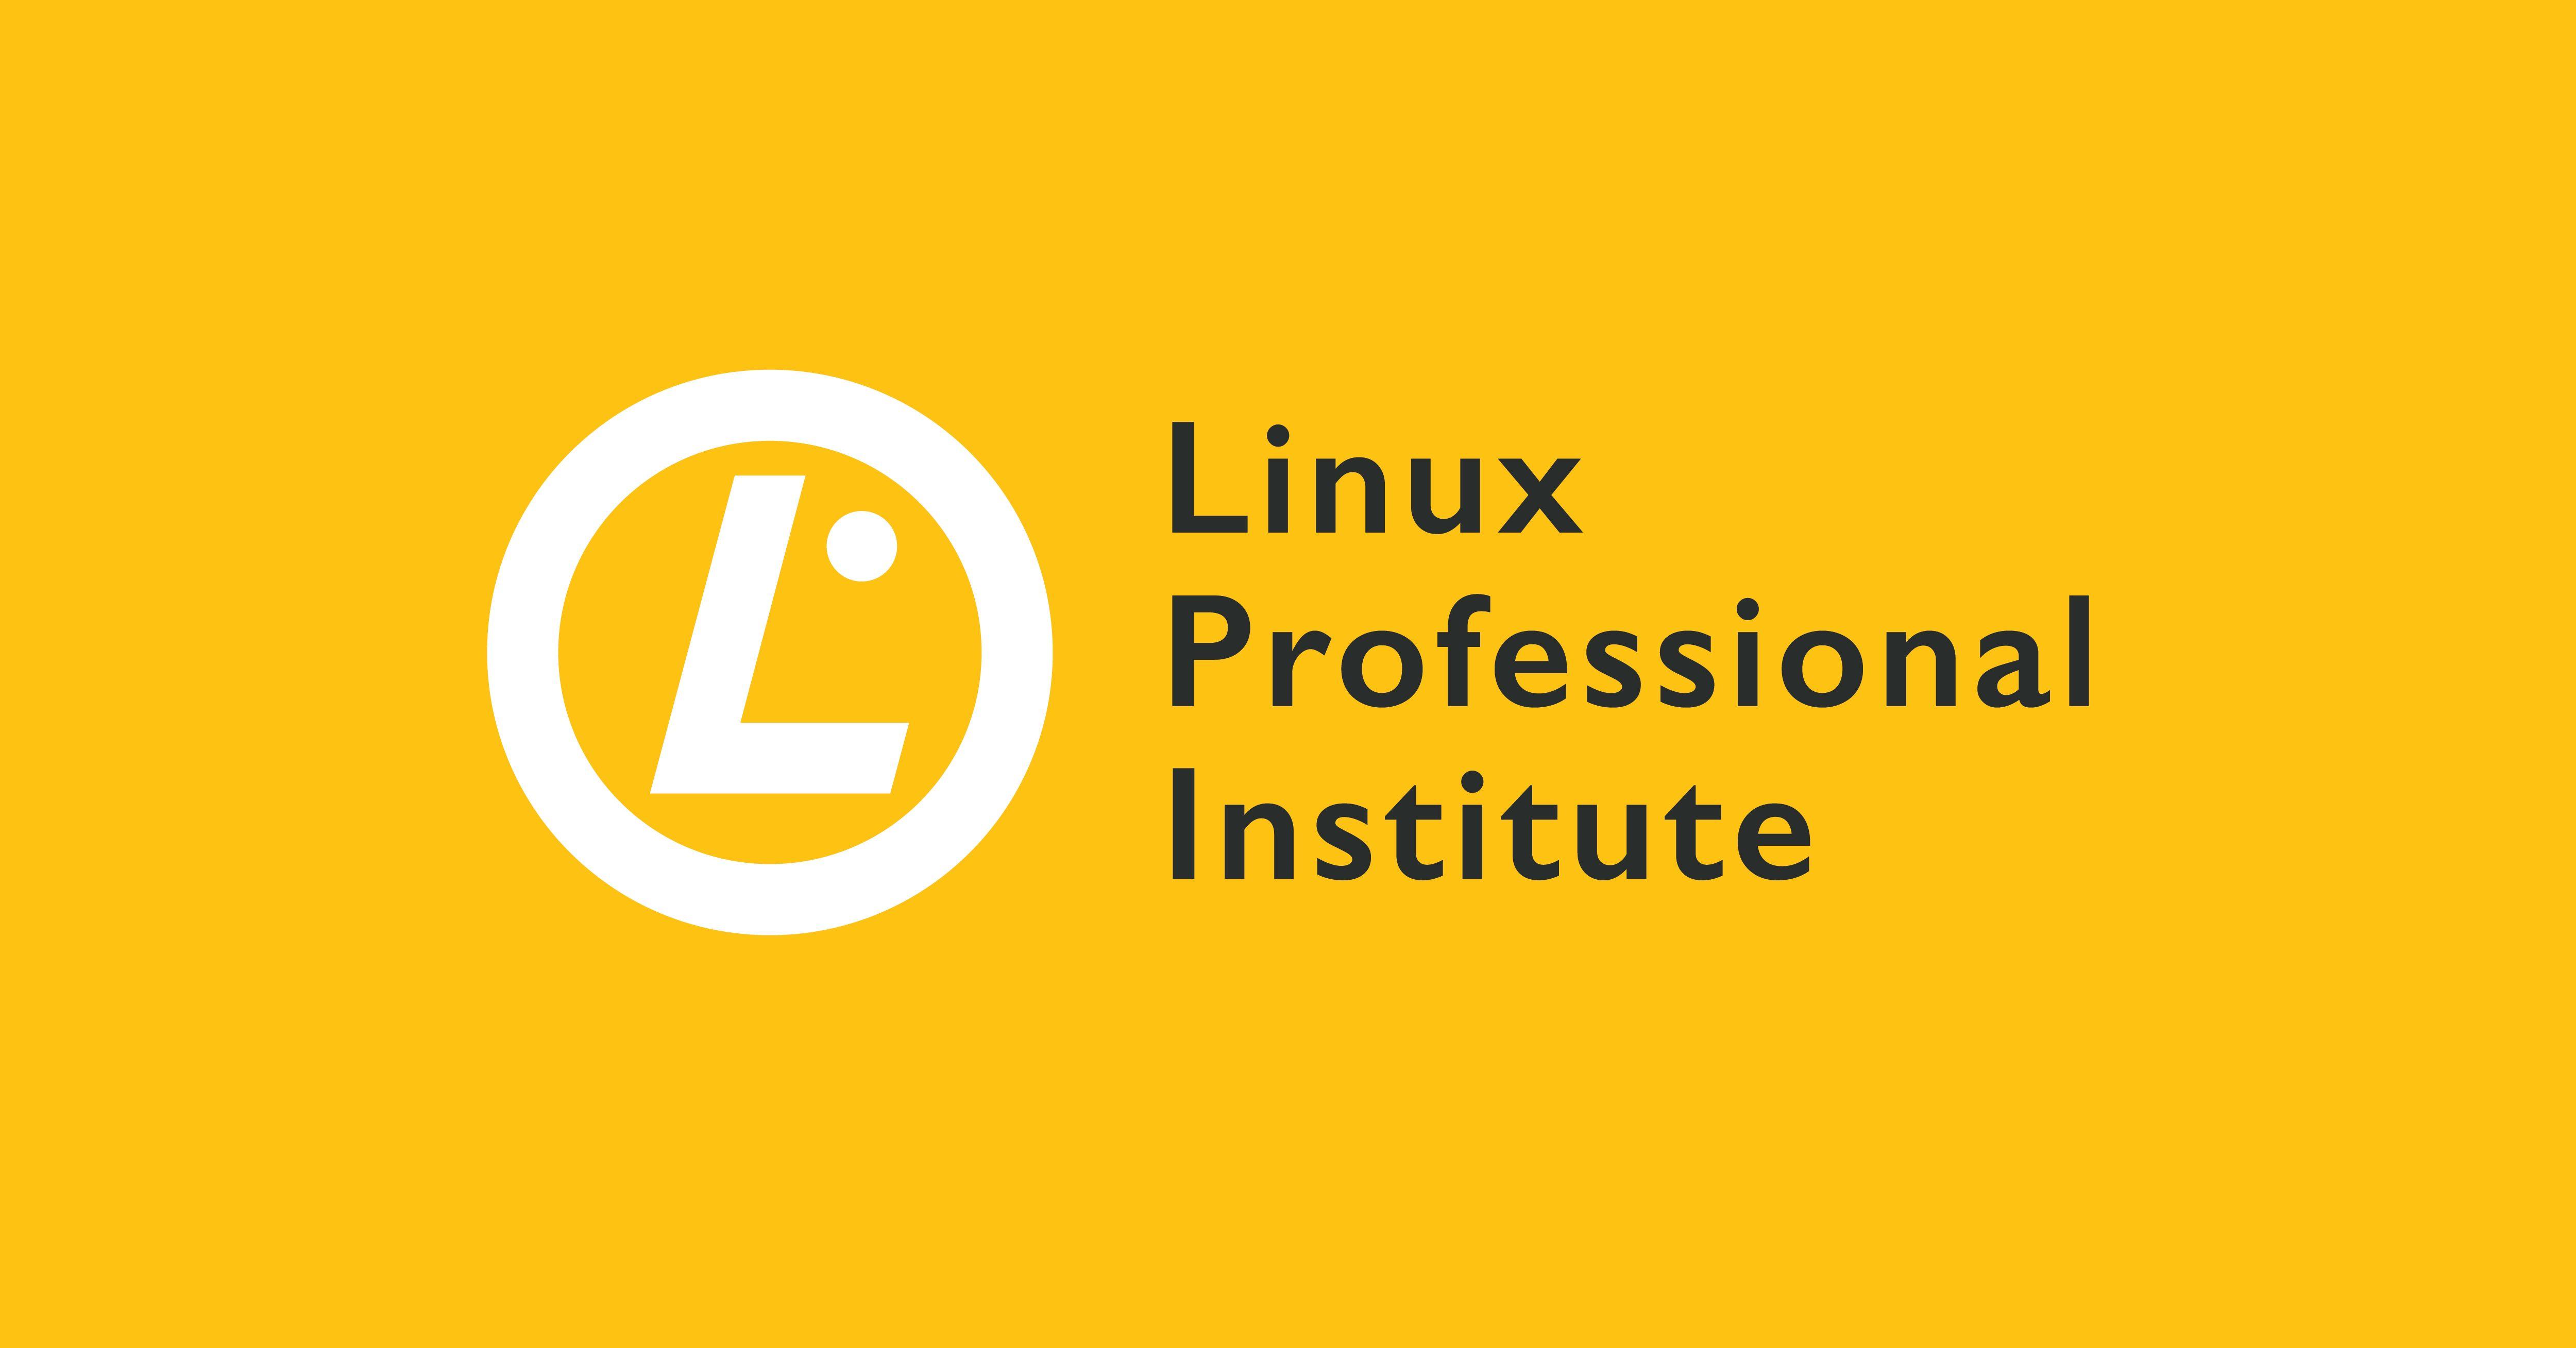 LPI Logo - Linux Professional Institute launches new website and brand identity